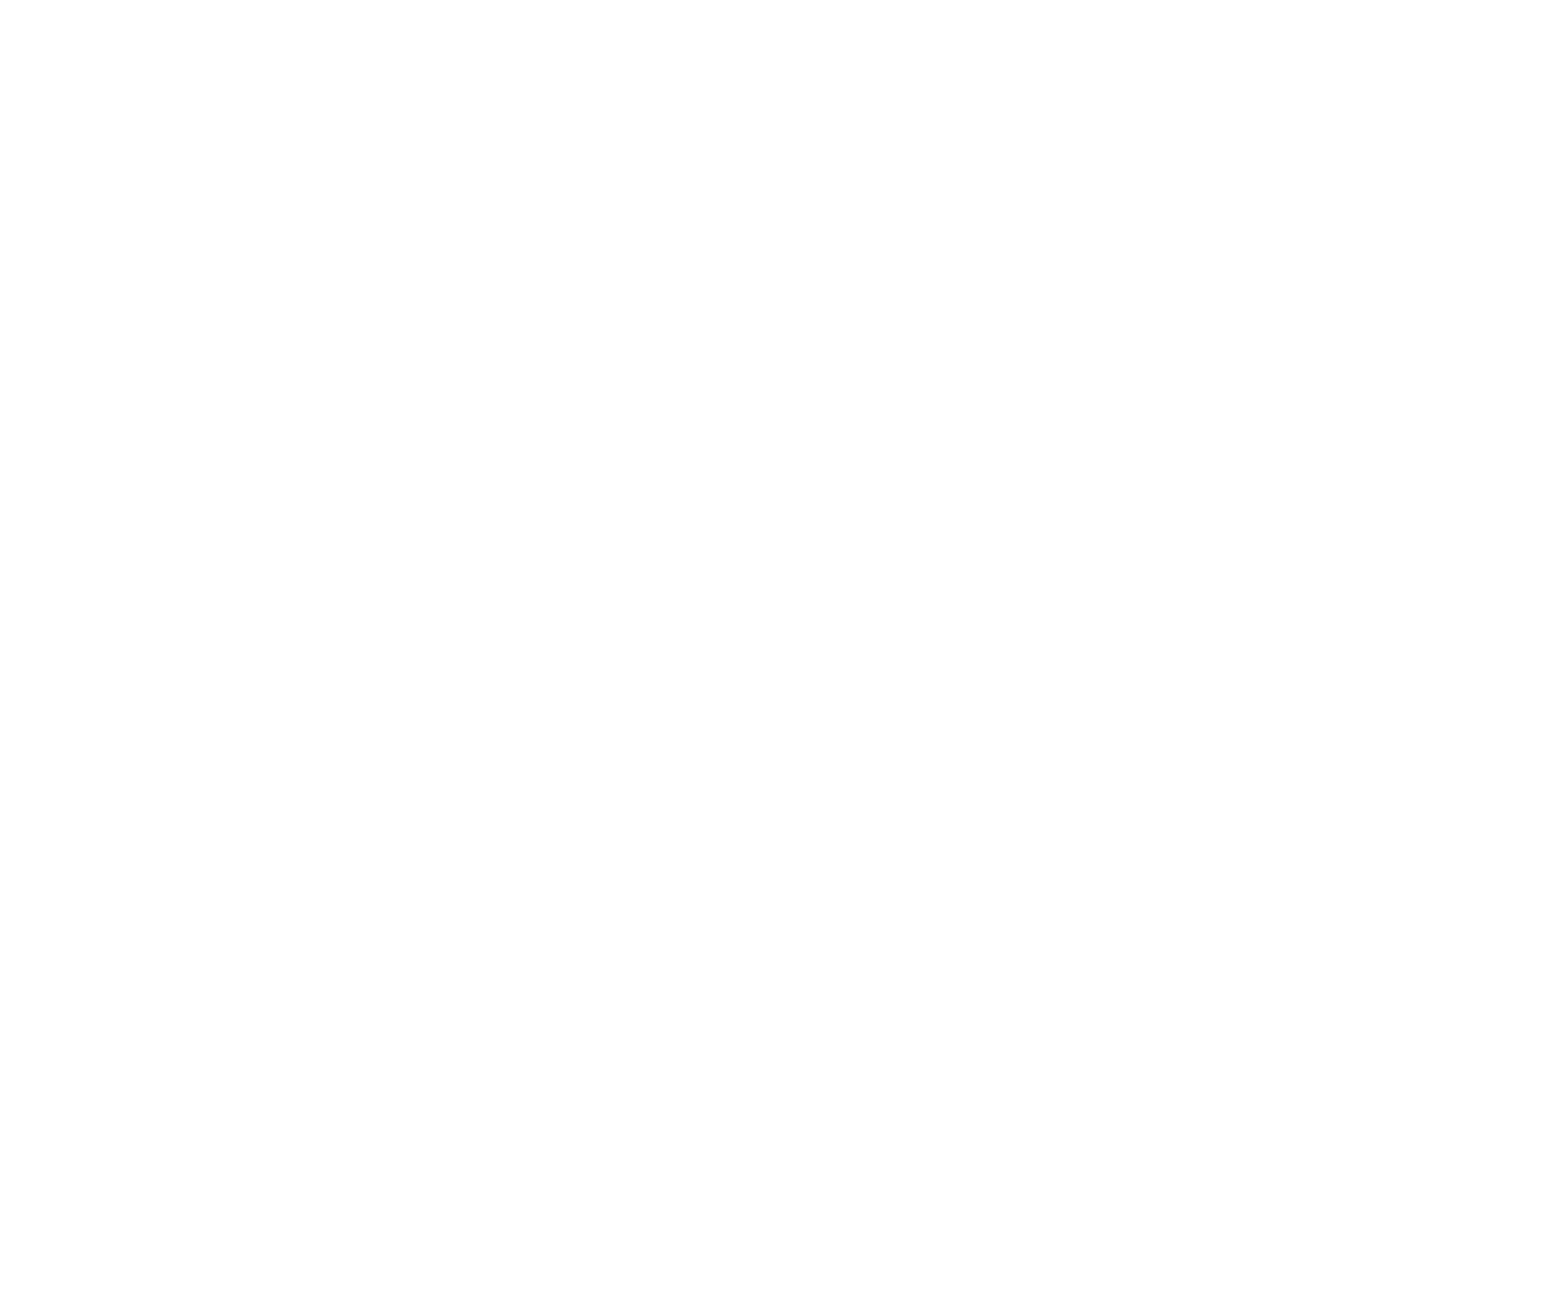 Consolidated Edison logo for dark backgrounds (transparent PNG)